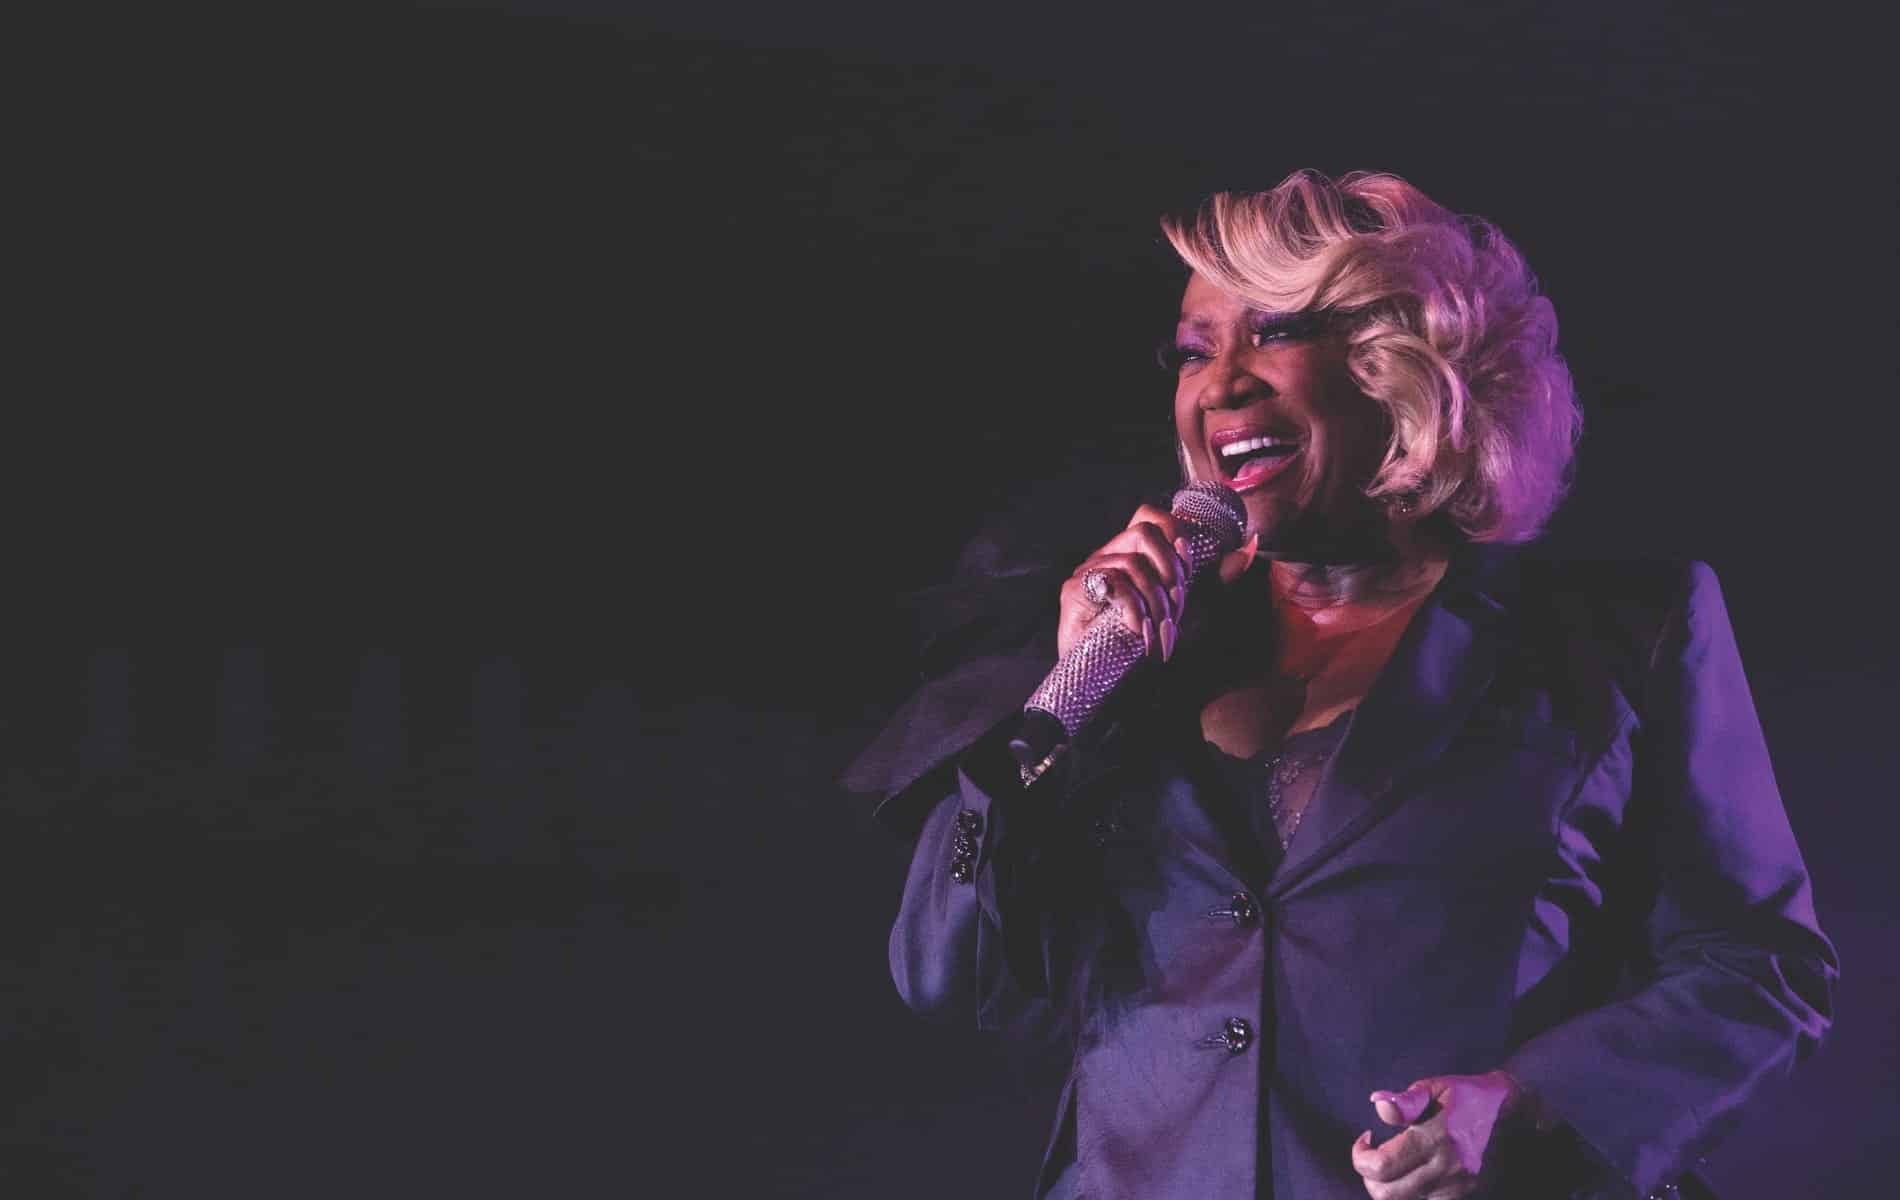 Sinfonia Gulf Coast: An Evening with Patti LaBelle